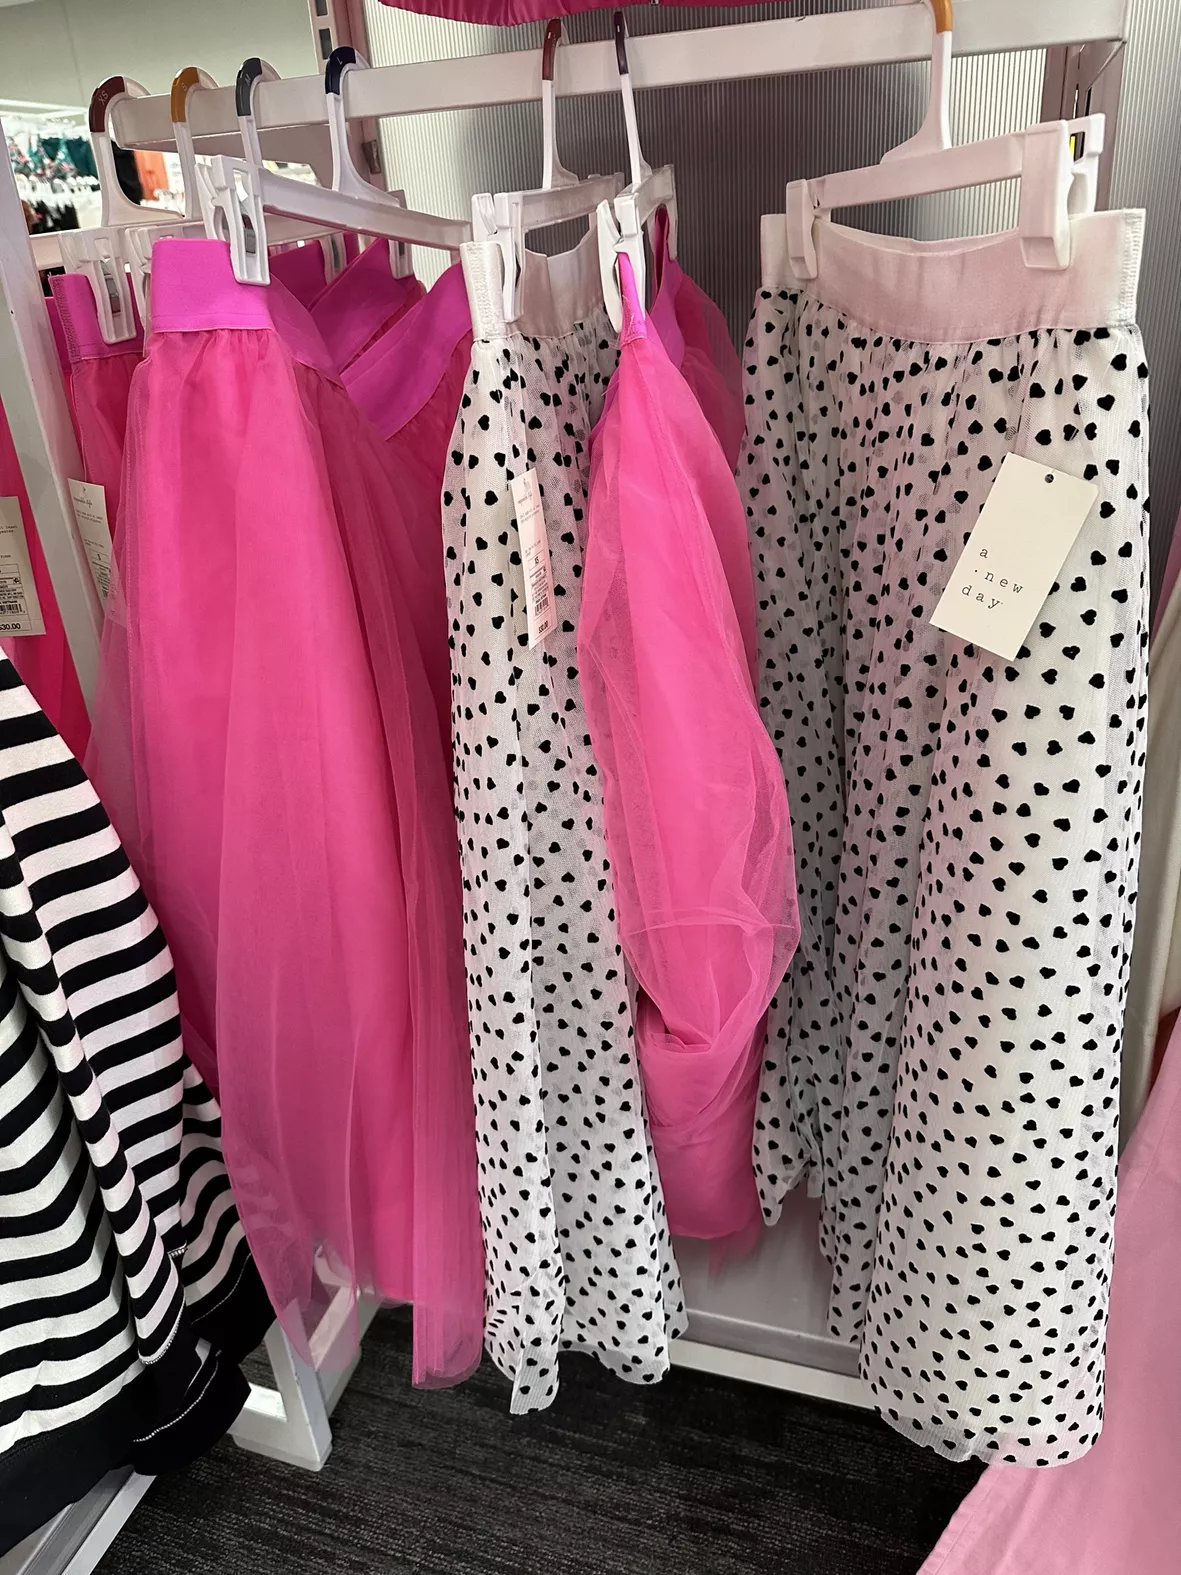 Knox Rose Women's Short Sleeve Dress, 23 Colourful Target Dresses, Because  We Can't Be the Only Ones Counting the Days to Spring